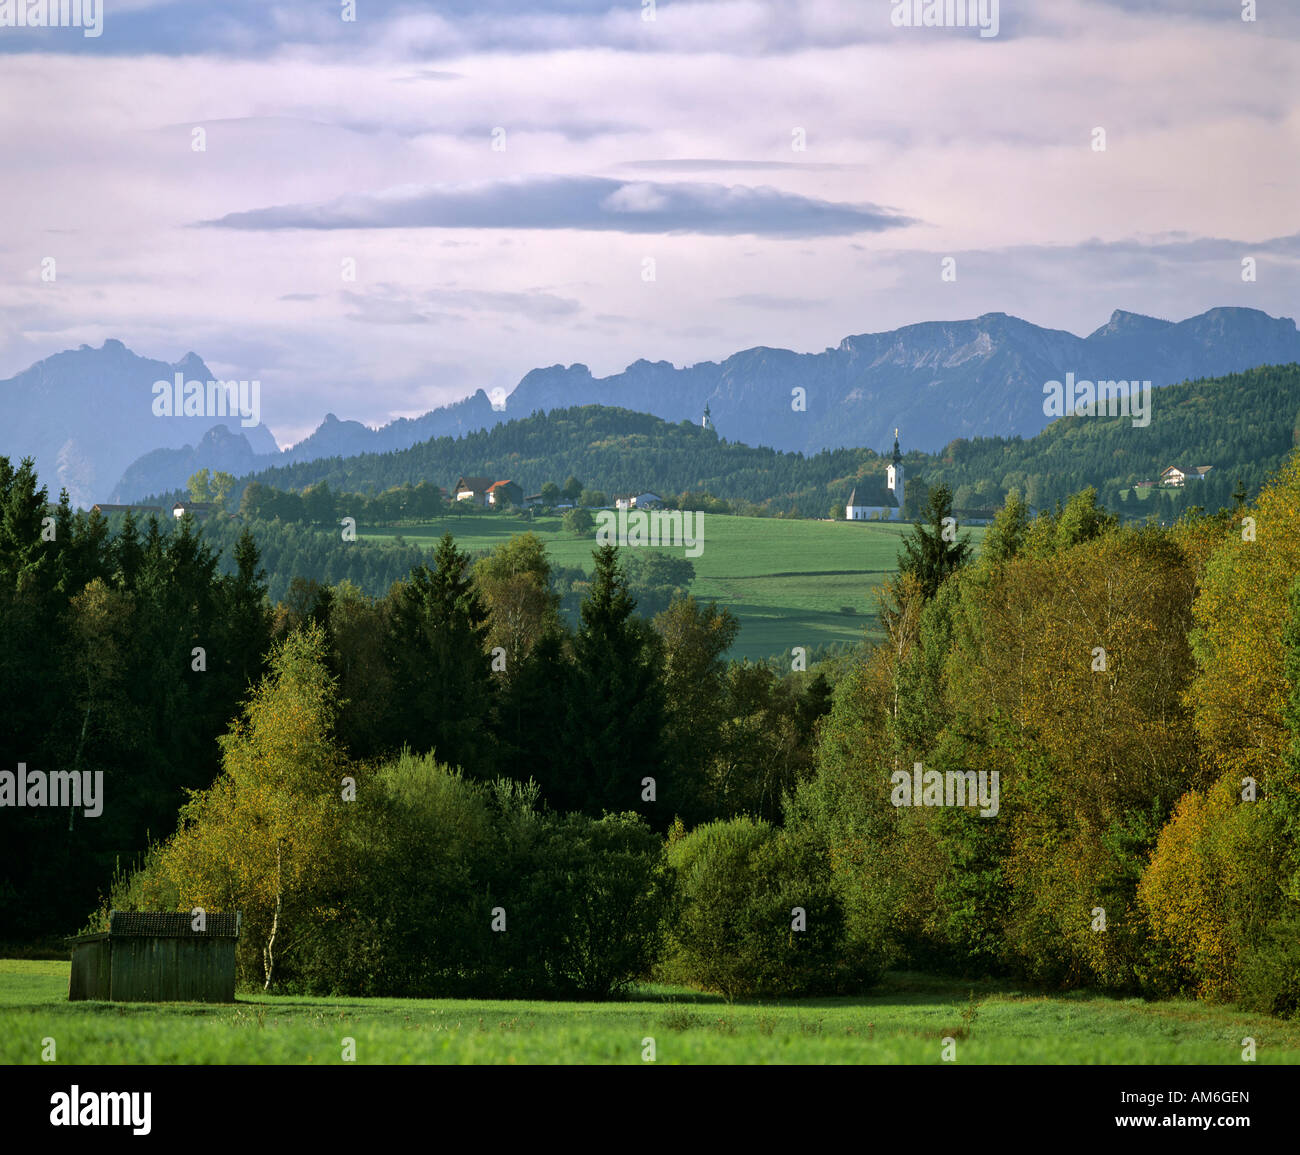 View from Ainringer Moos, church of Ulrichshoegl, Berchtesgaden mountains, Upper Bavaria, Germany Stock Photo